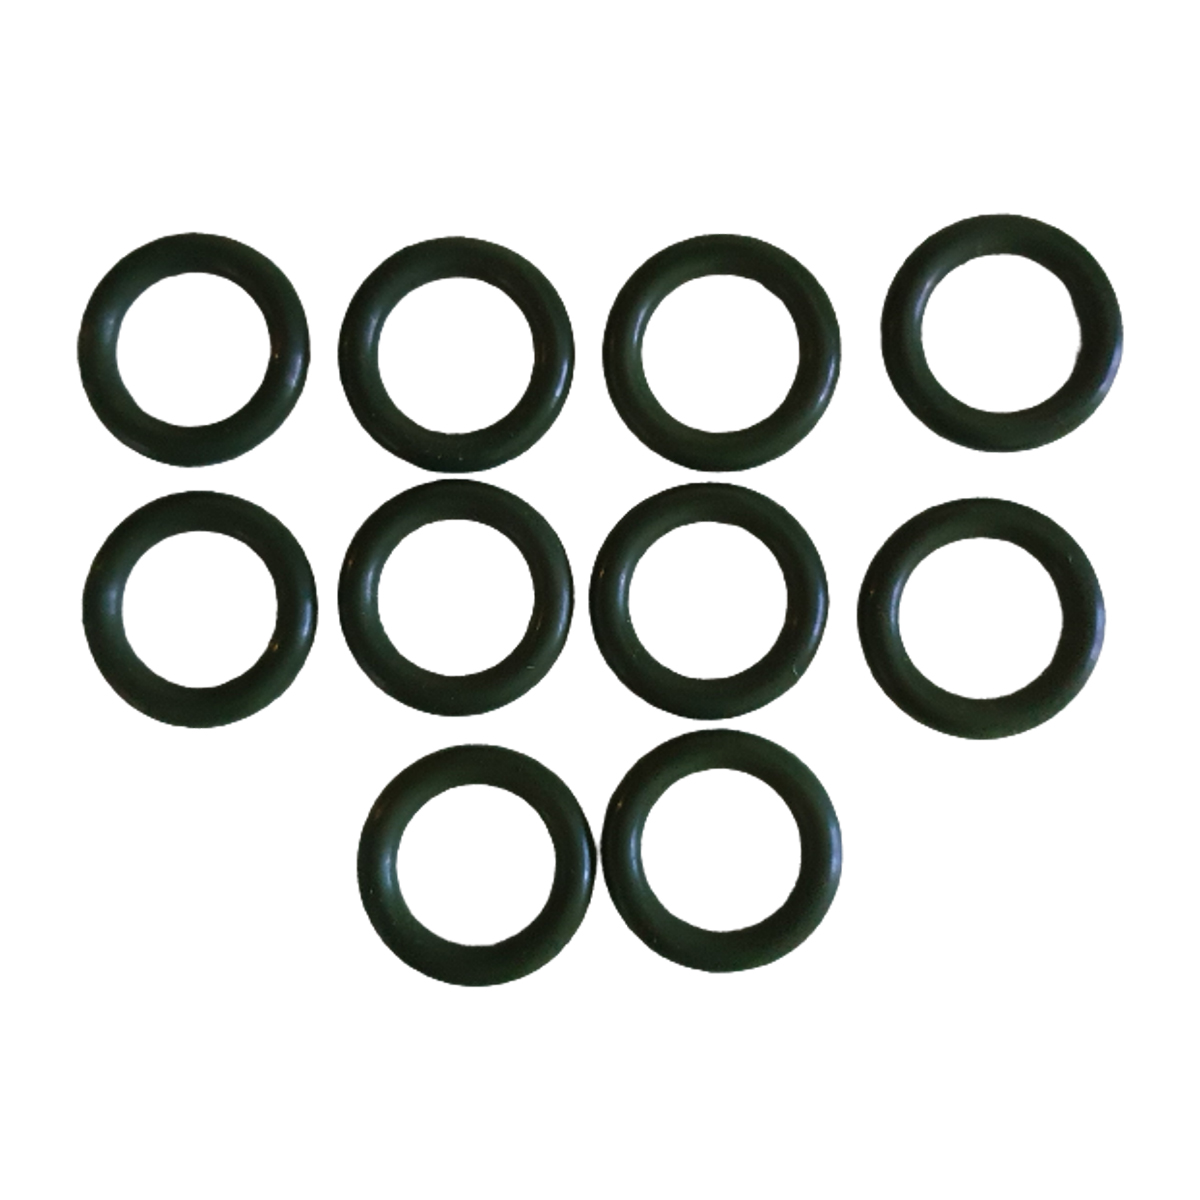 13273P - O-Ring 93 x 24mm Pkt 10